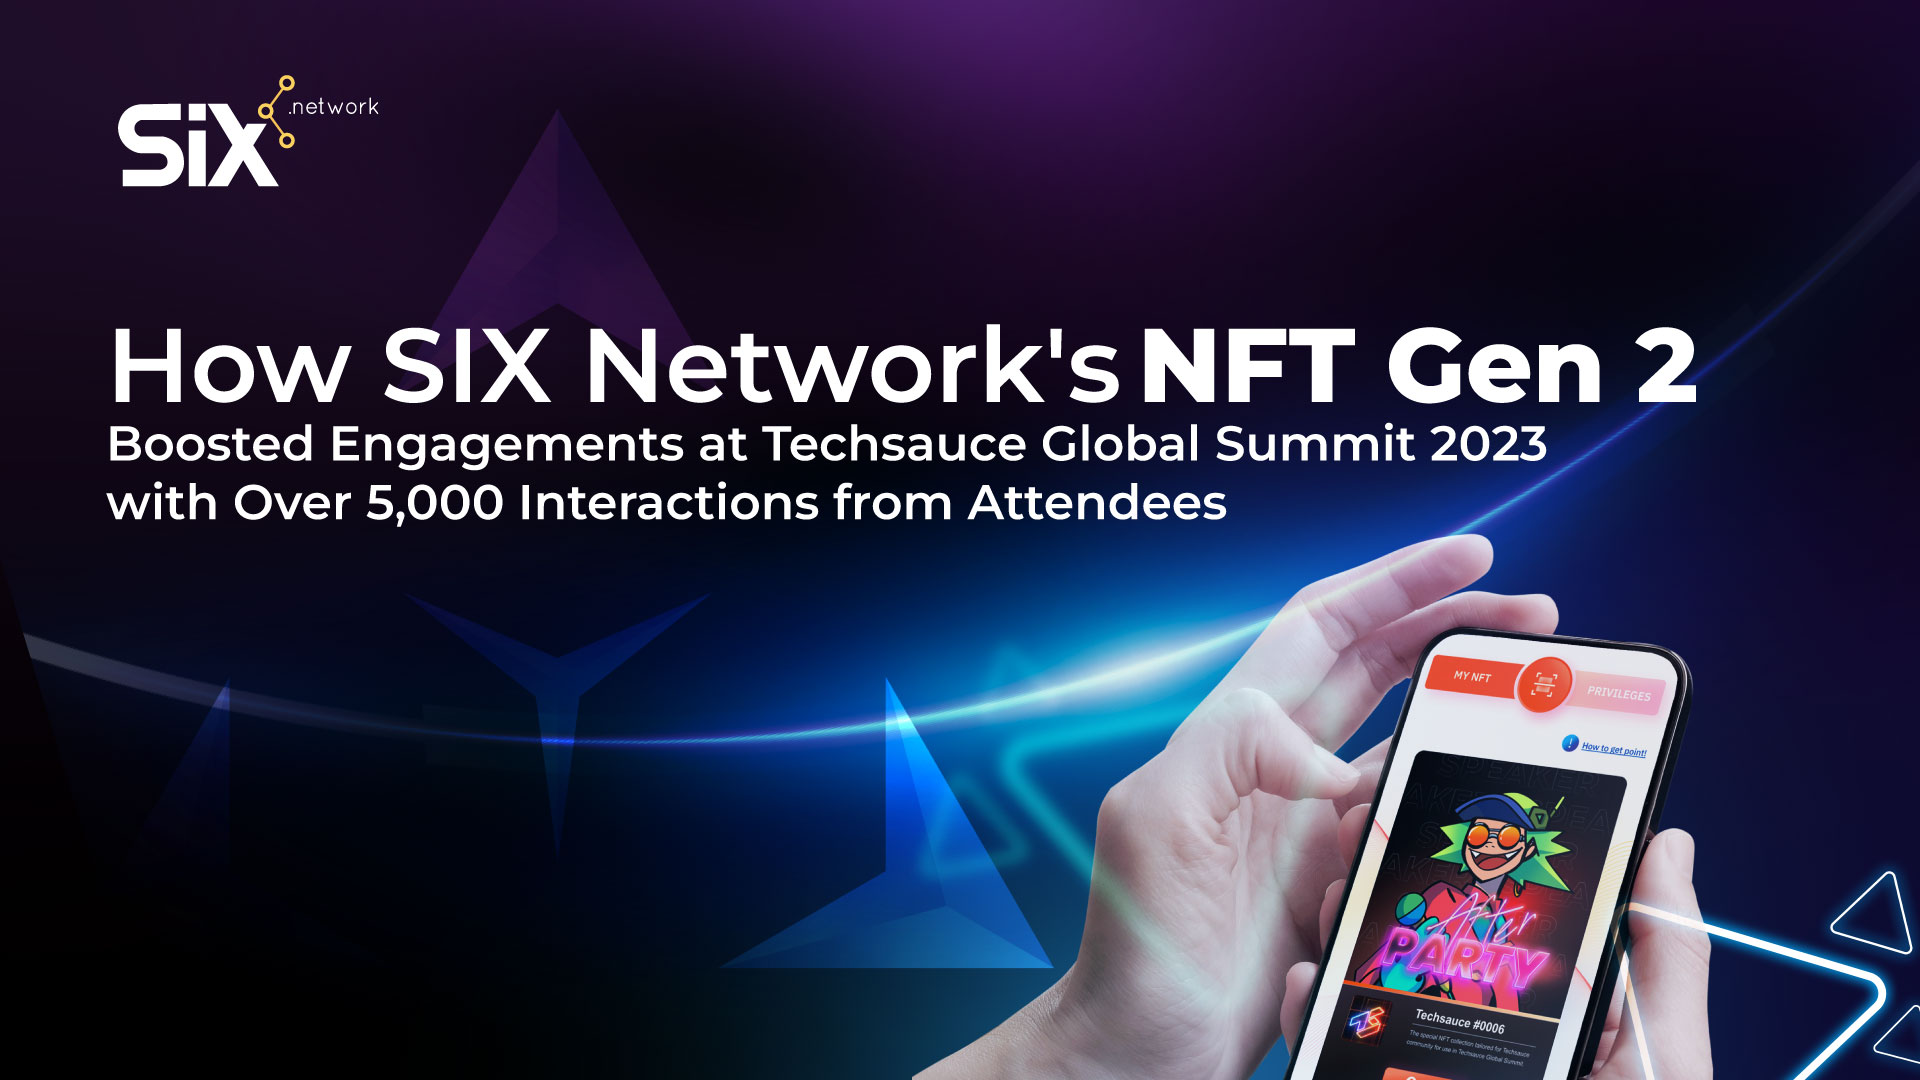 How SIX Network’s NFT Gen 2 Boosted Engagements at Techsauce Global Summit 2023 with Over 5,000 Interactions from Attendees